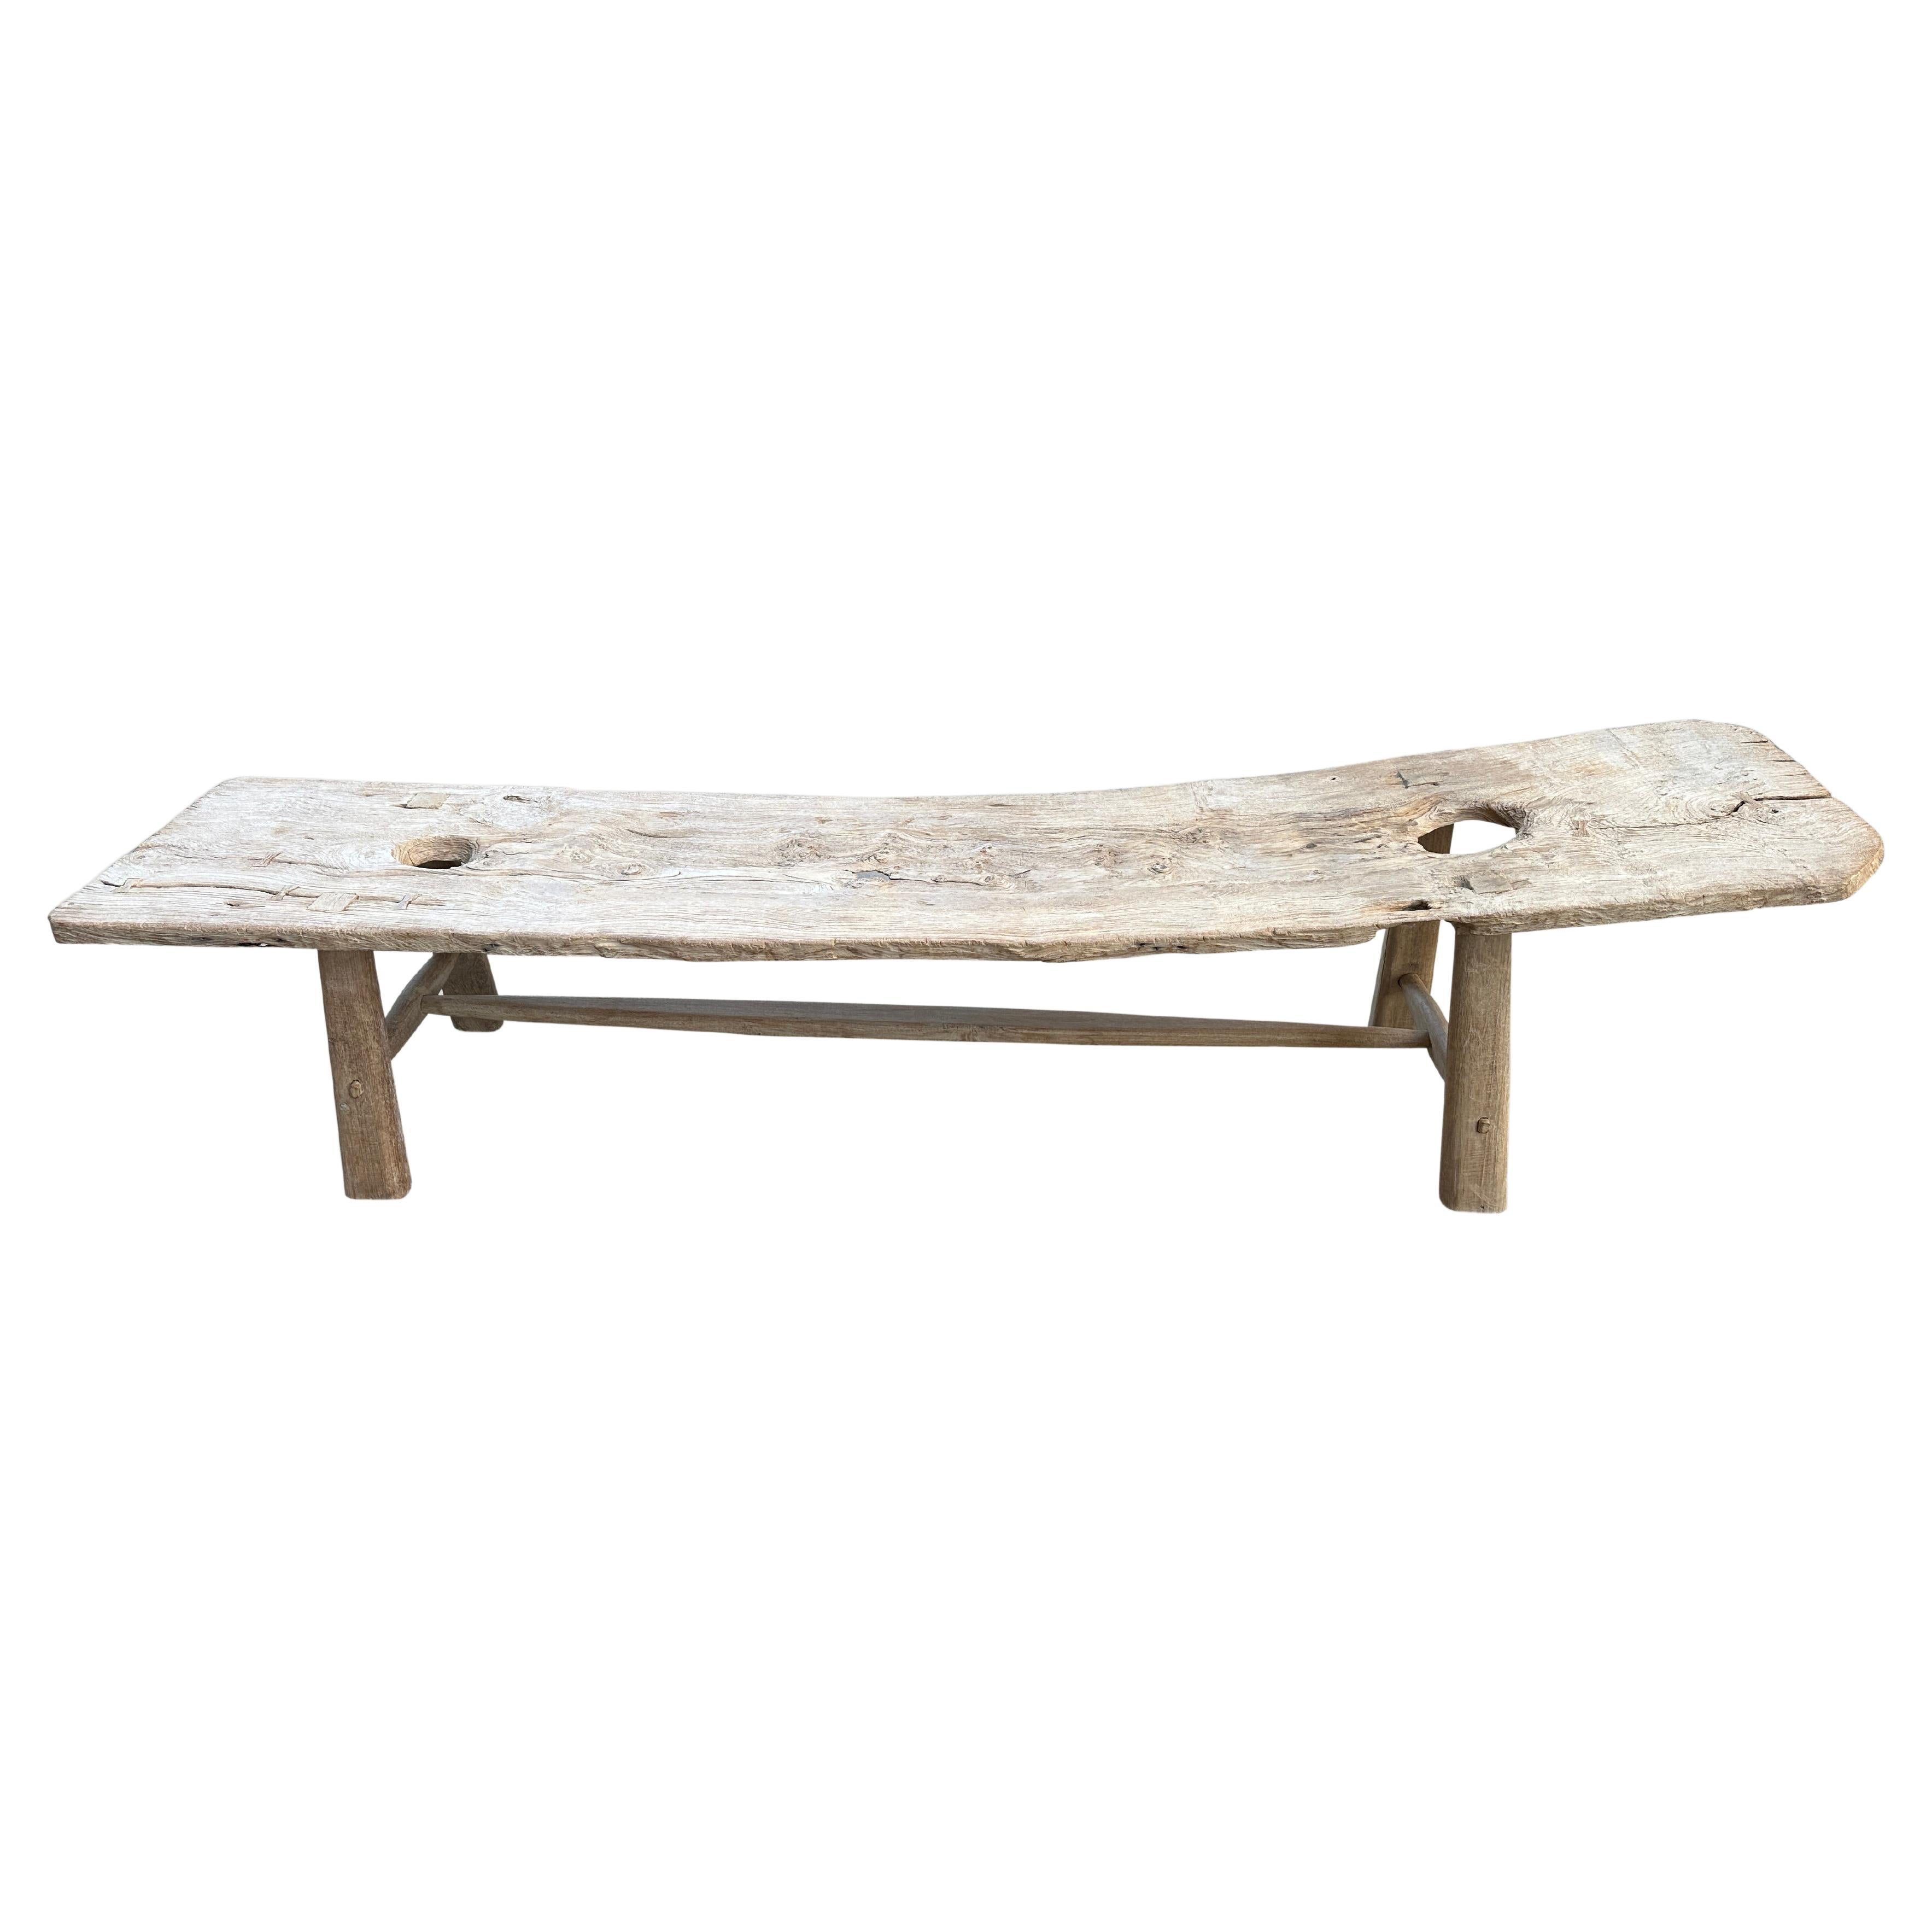 Andrianna Shamaris Impressive Bleached Teak Wood Chaise or Bench For Sale